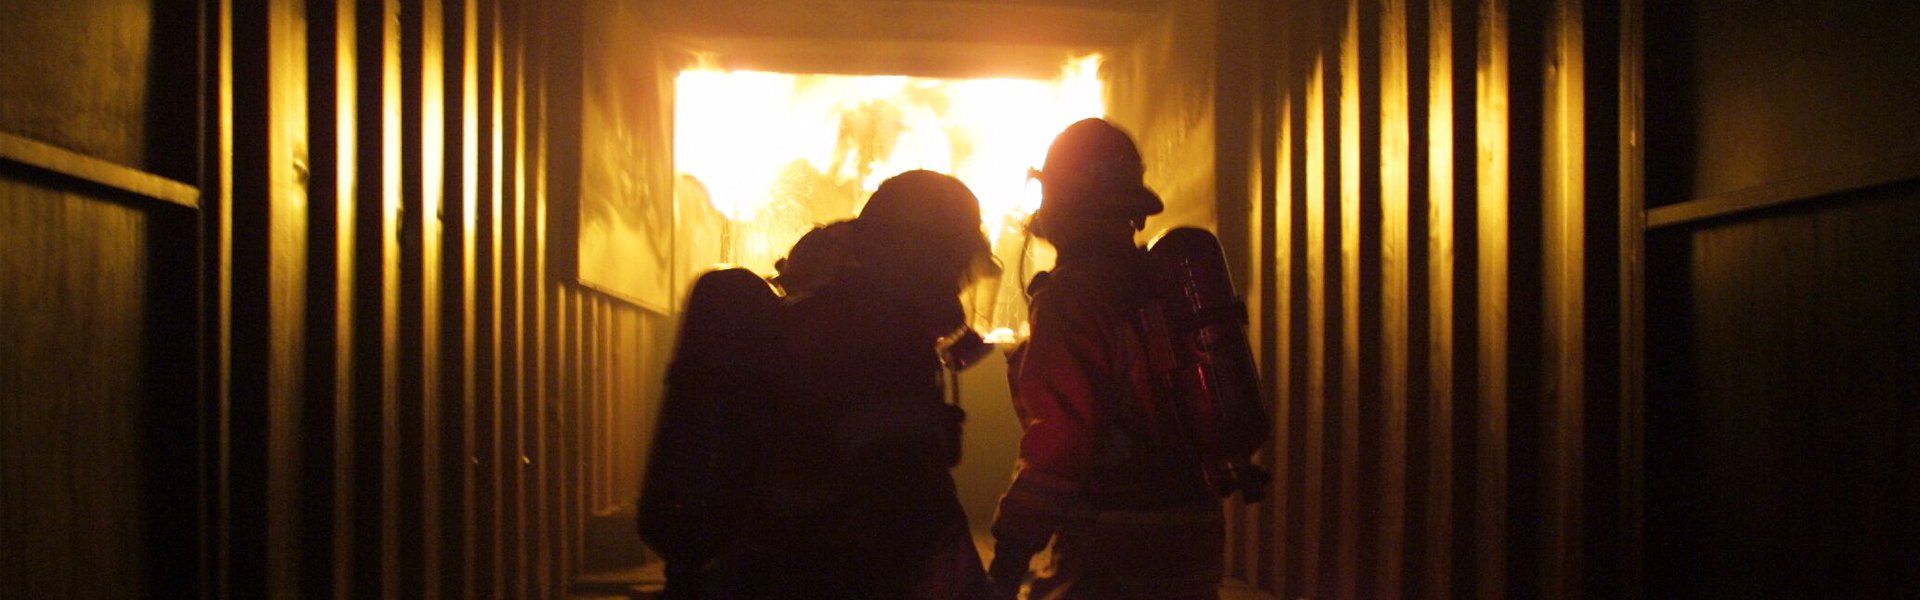 Firefighters looking into the fire